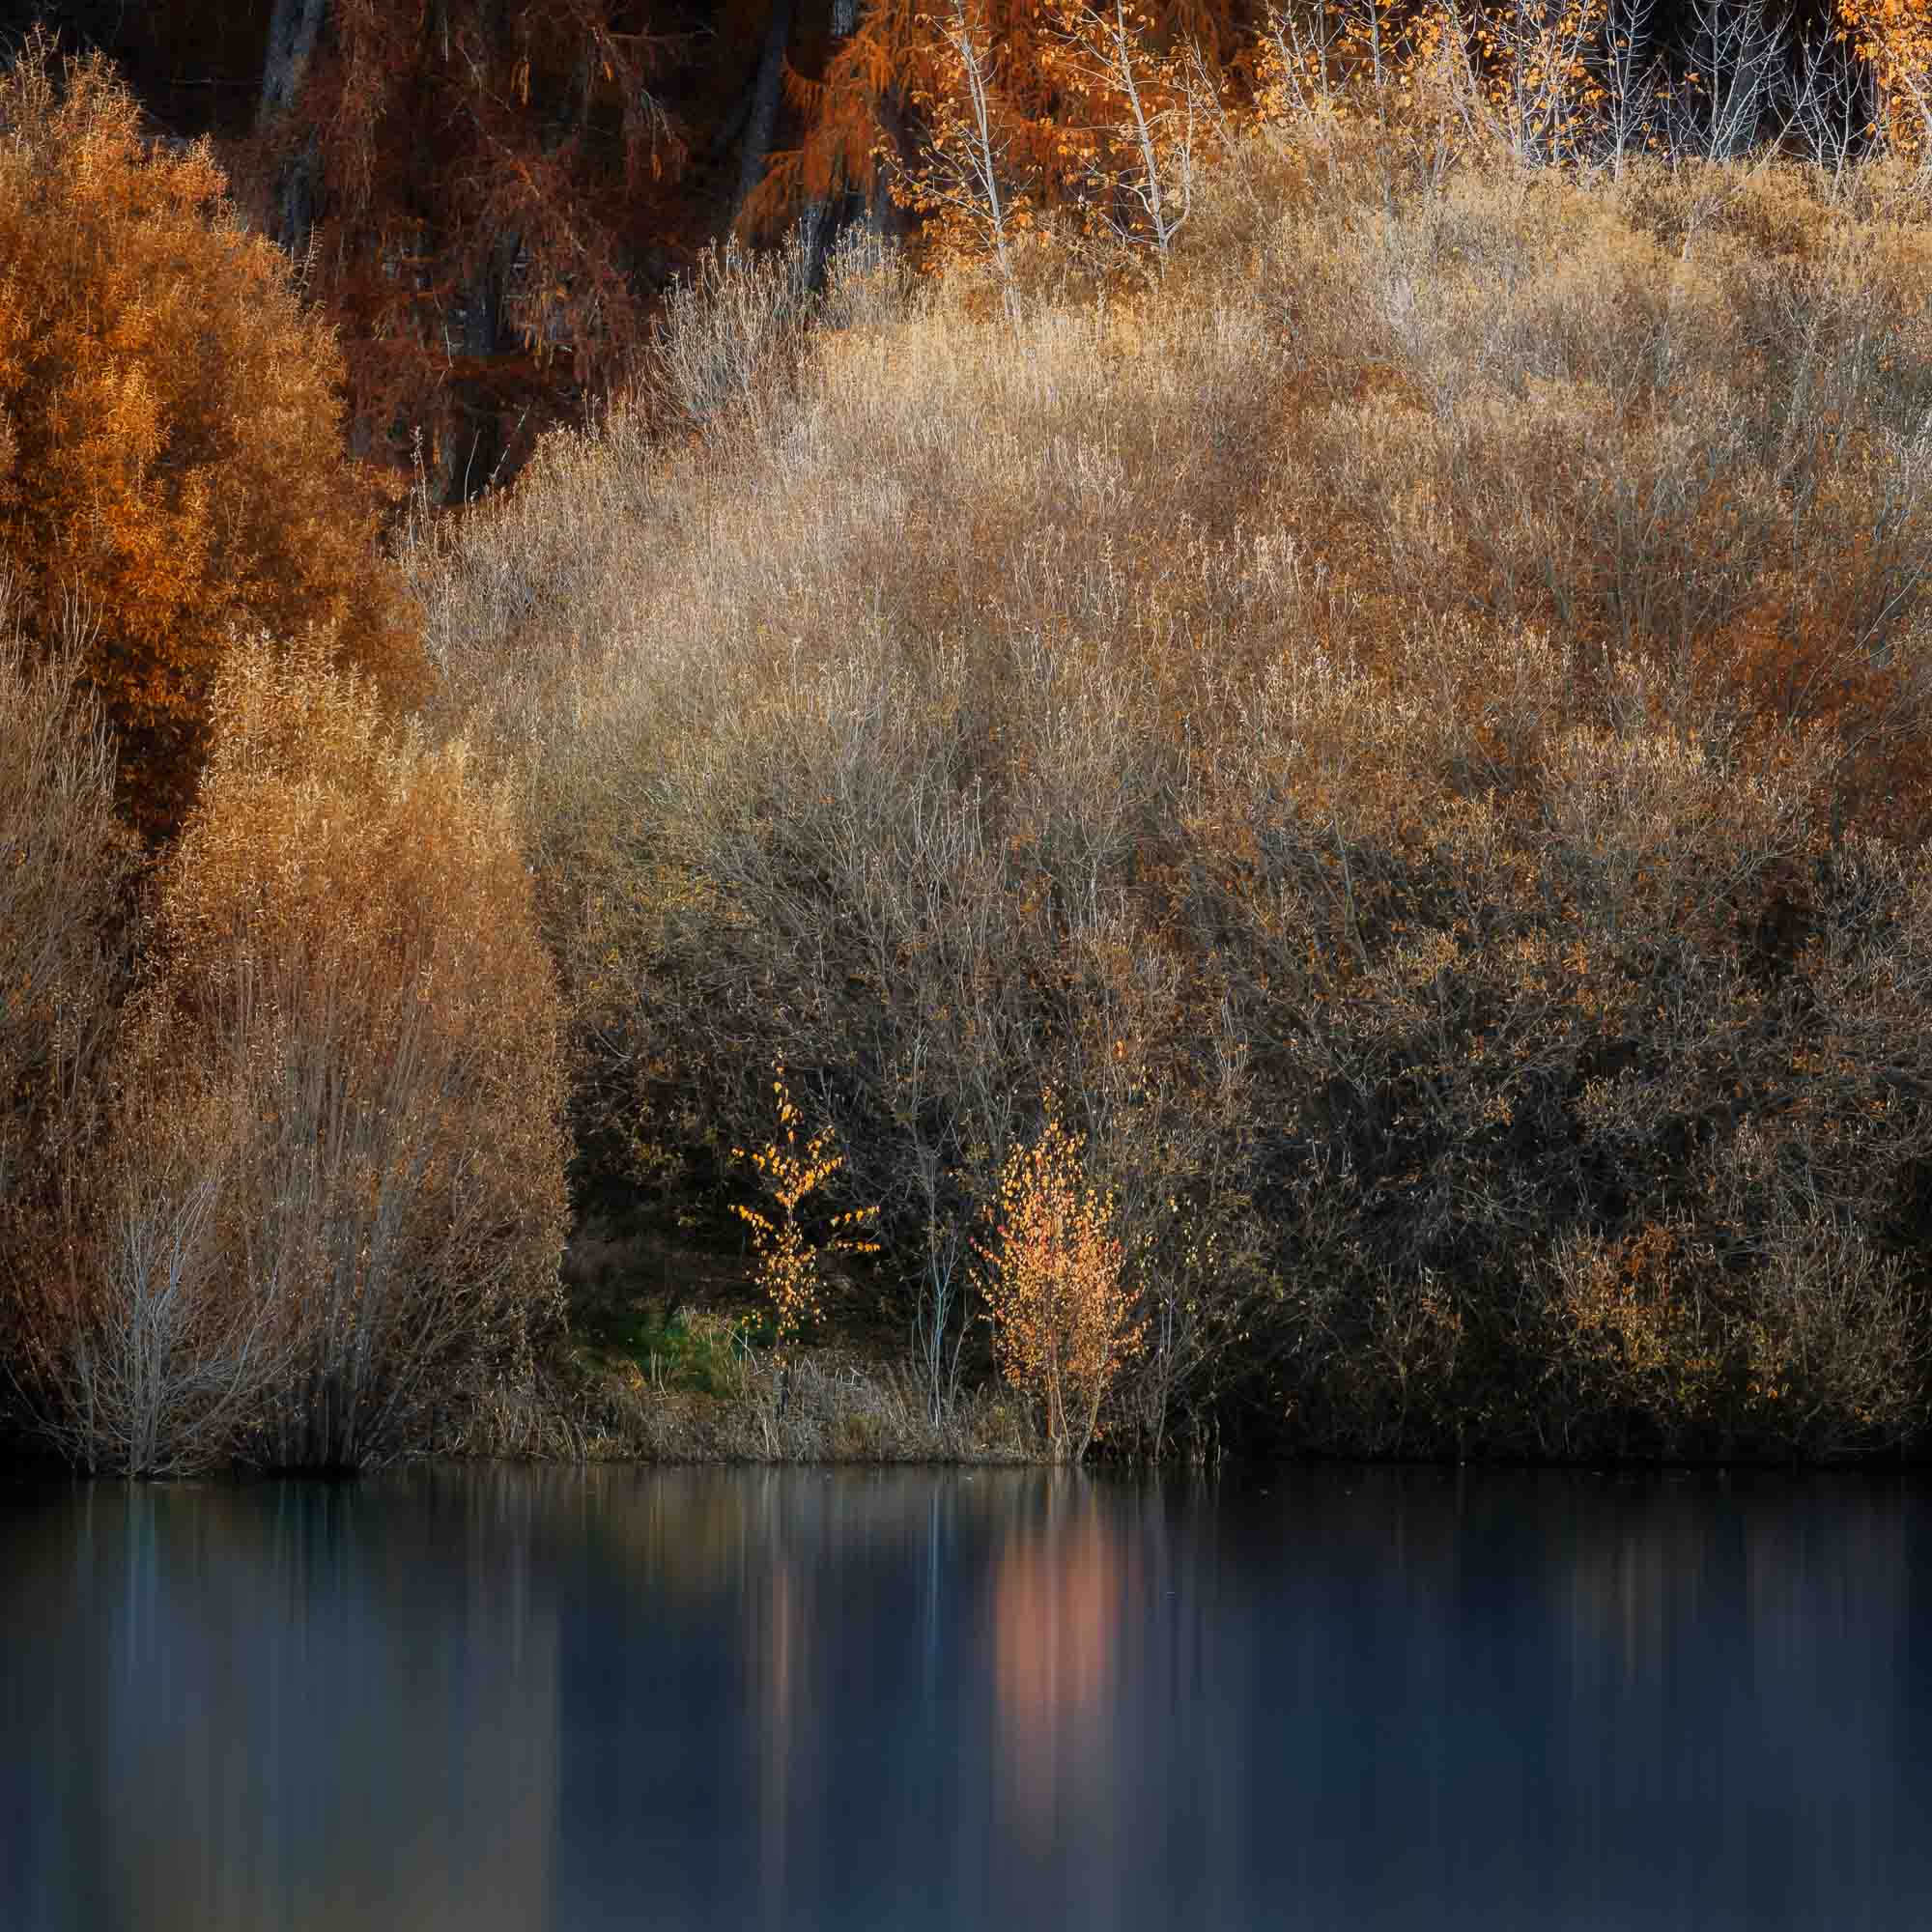 Golden autumn foliage by the peaceful shores of Lake Tekapo, New Zealand, with reflections in the calm water.